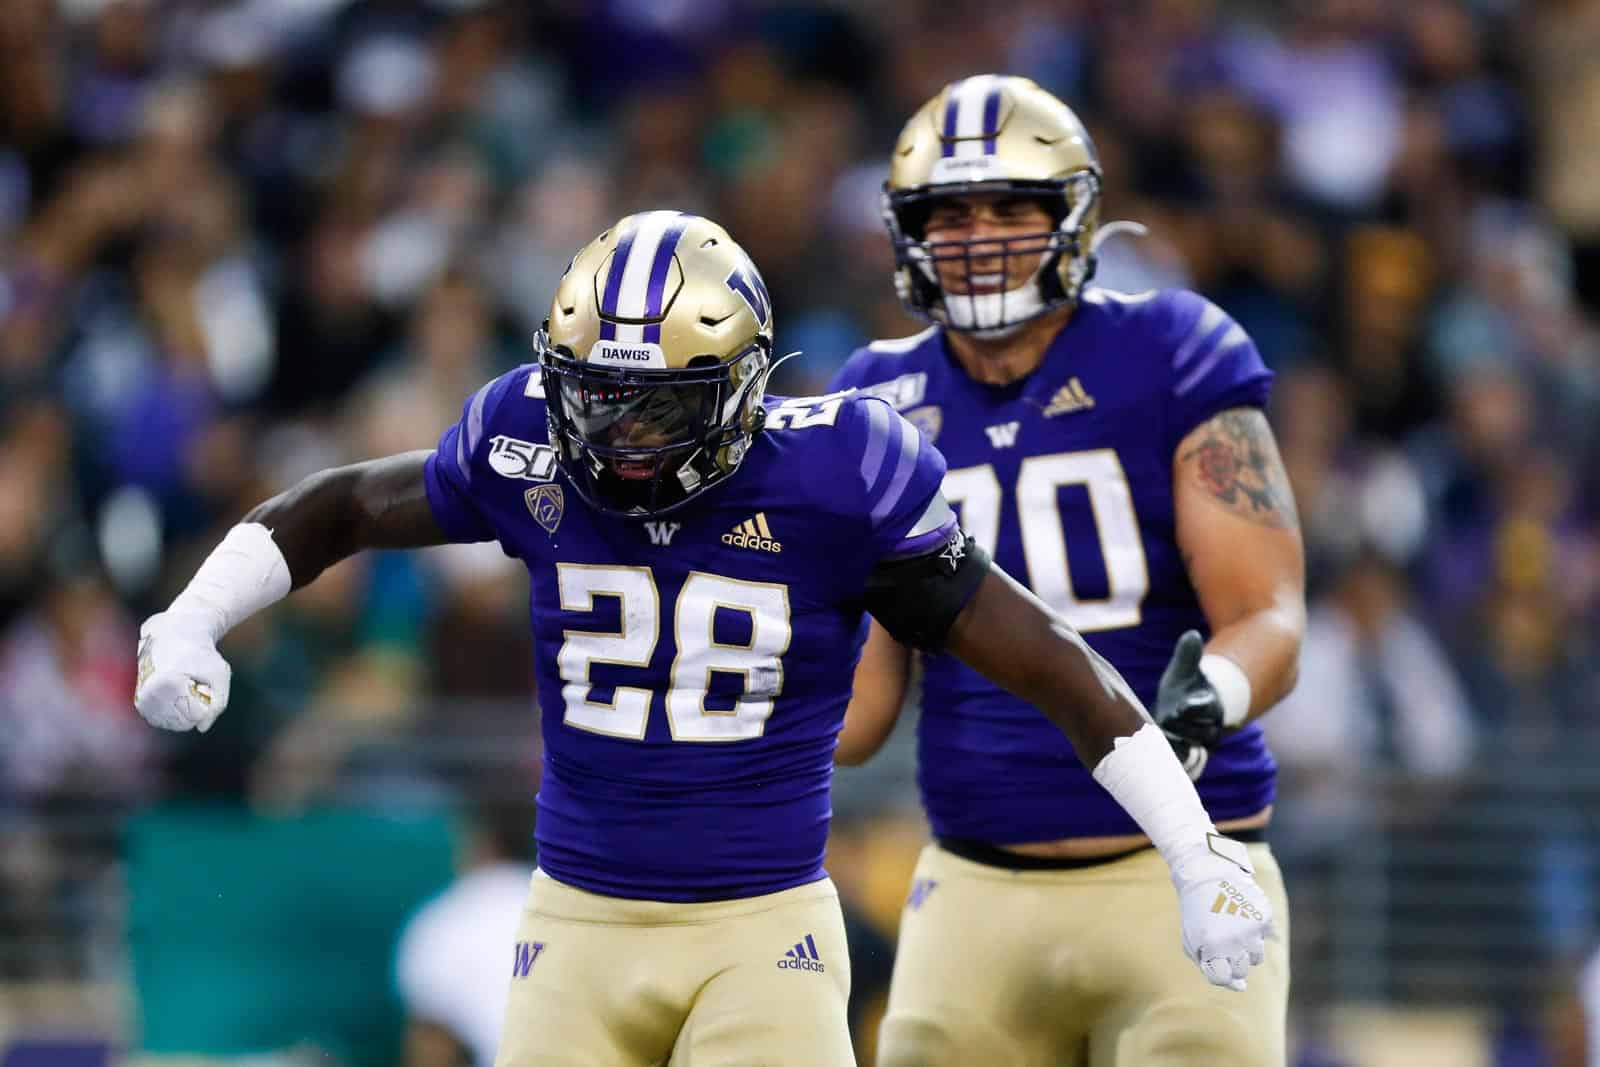 Husky Football Schedule 2022 Washington Adds Kent State To 2022 Football Schedule